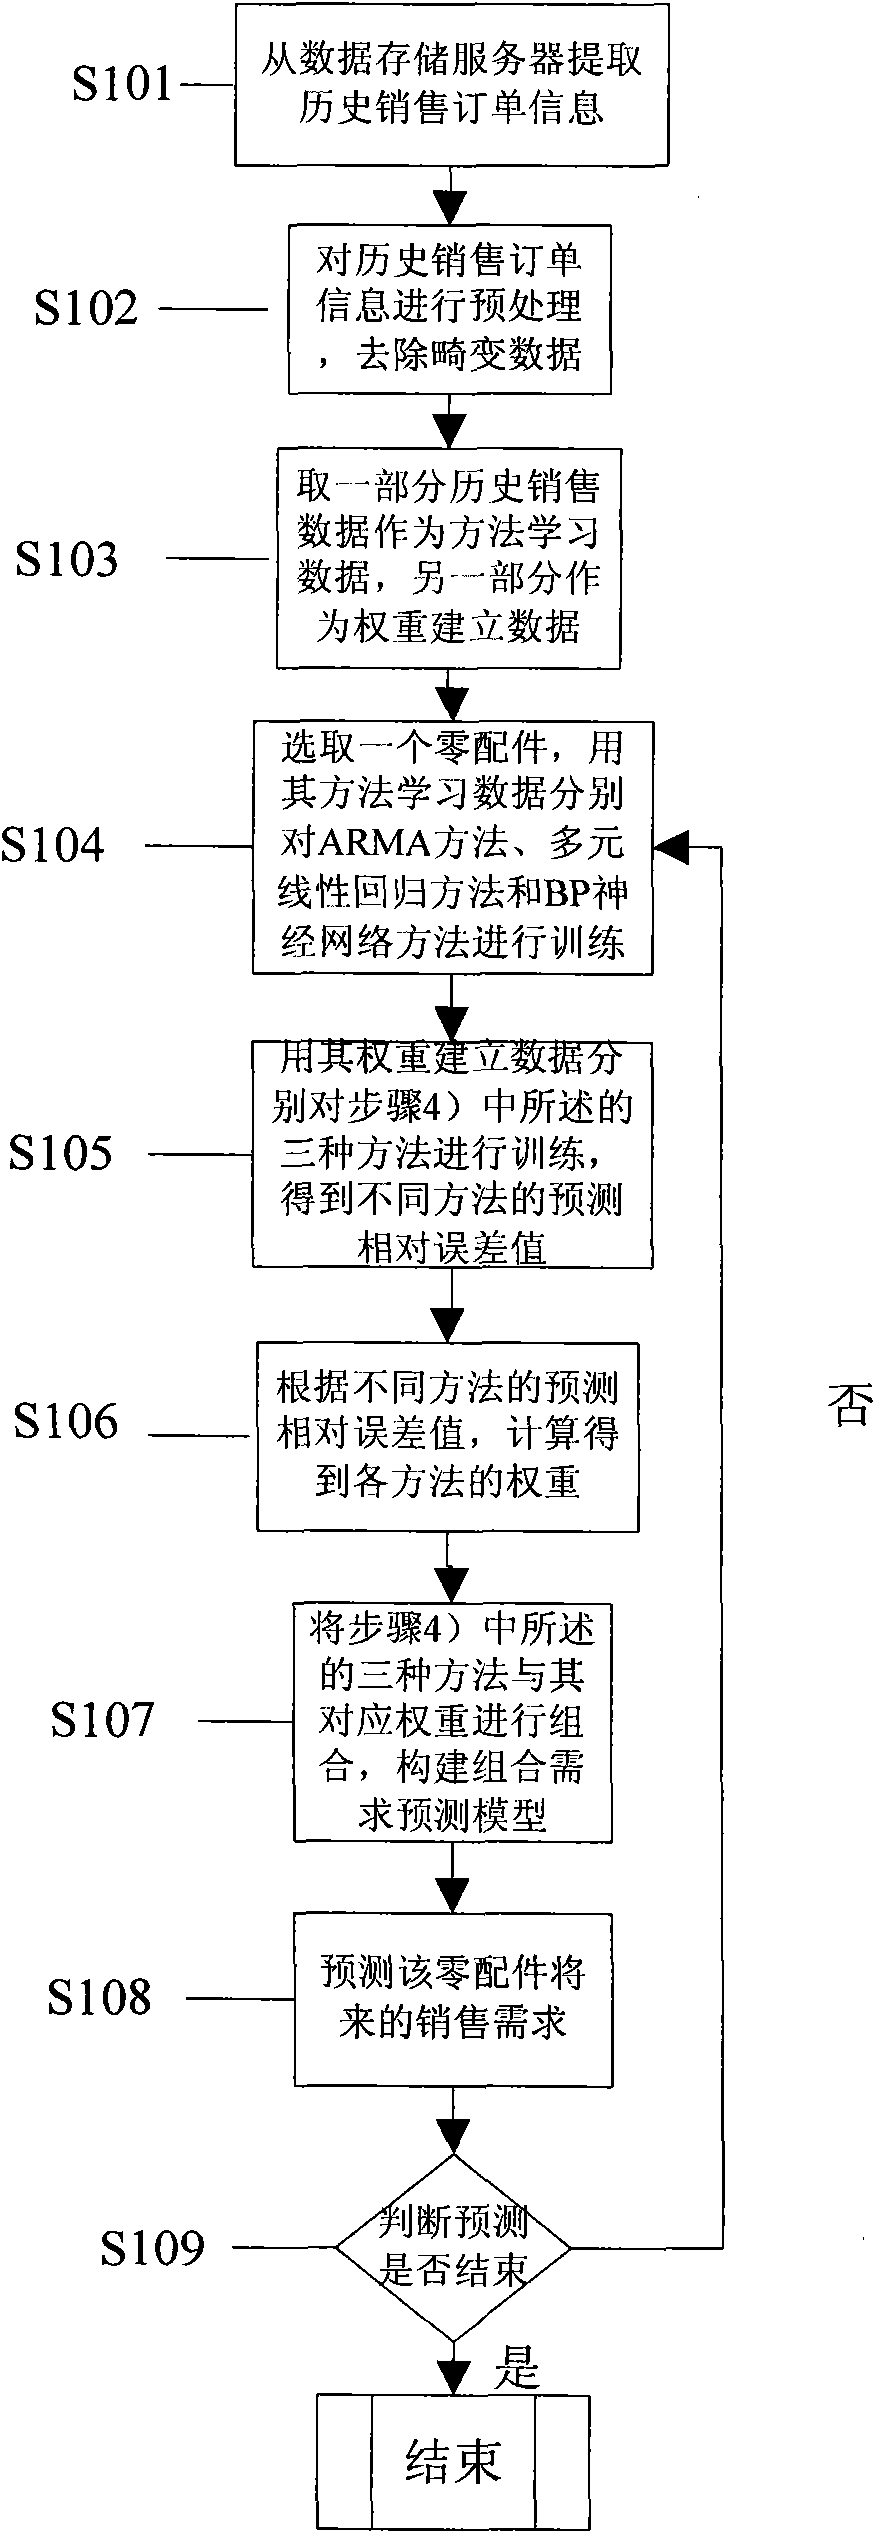 Spare part assembling demand forecasting information processing method applied to inventory management